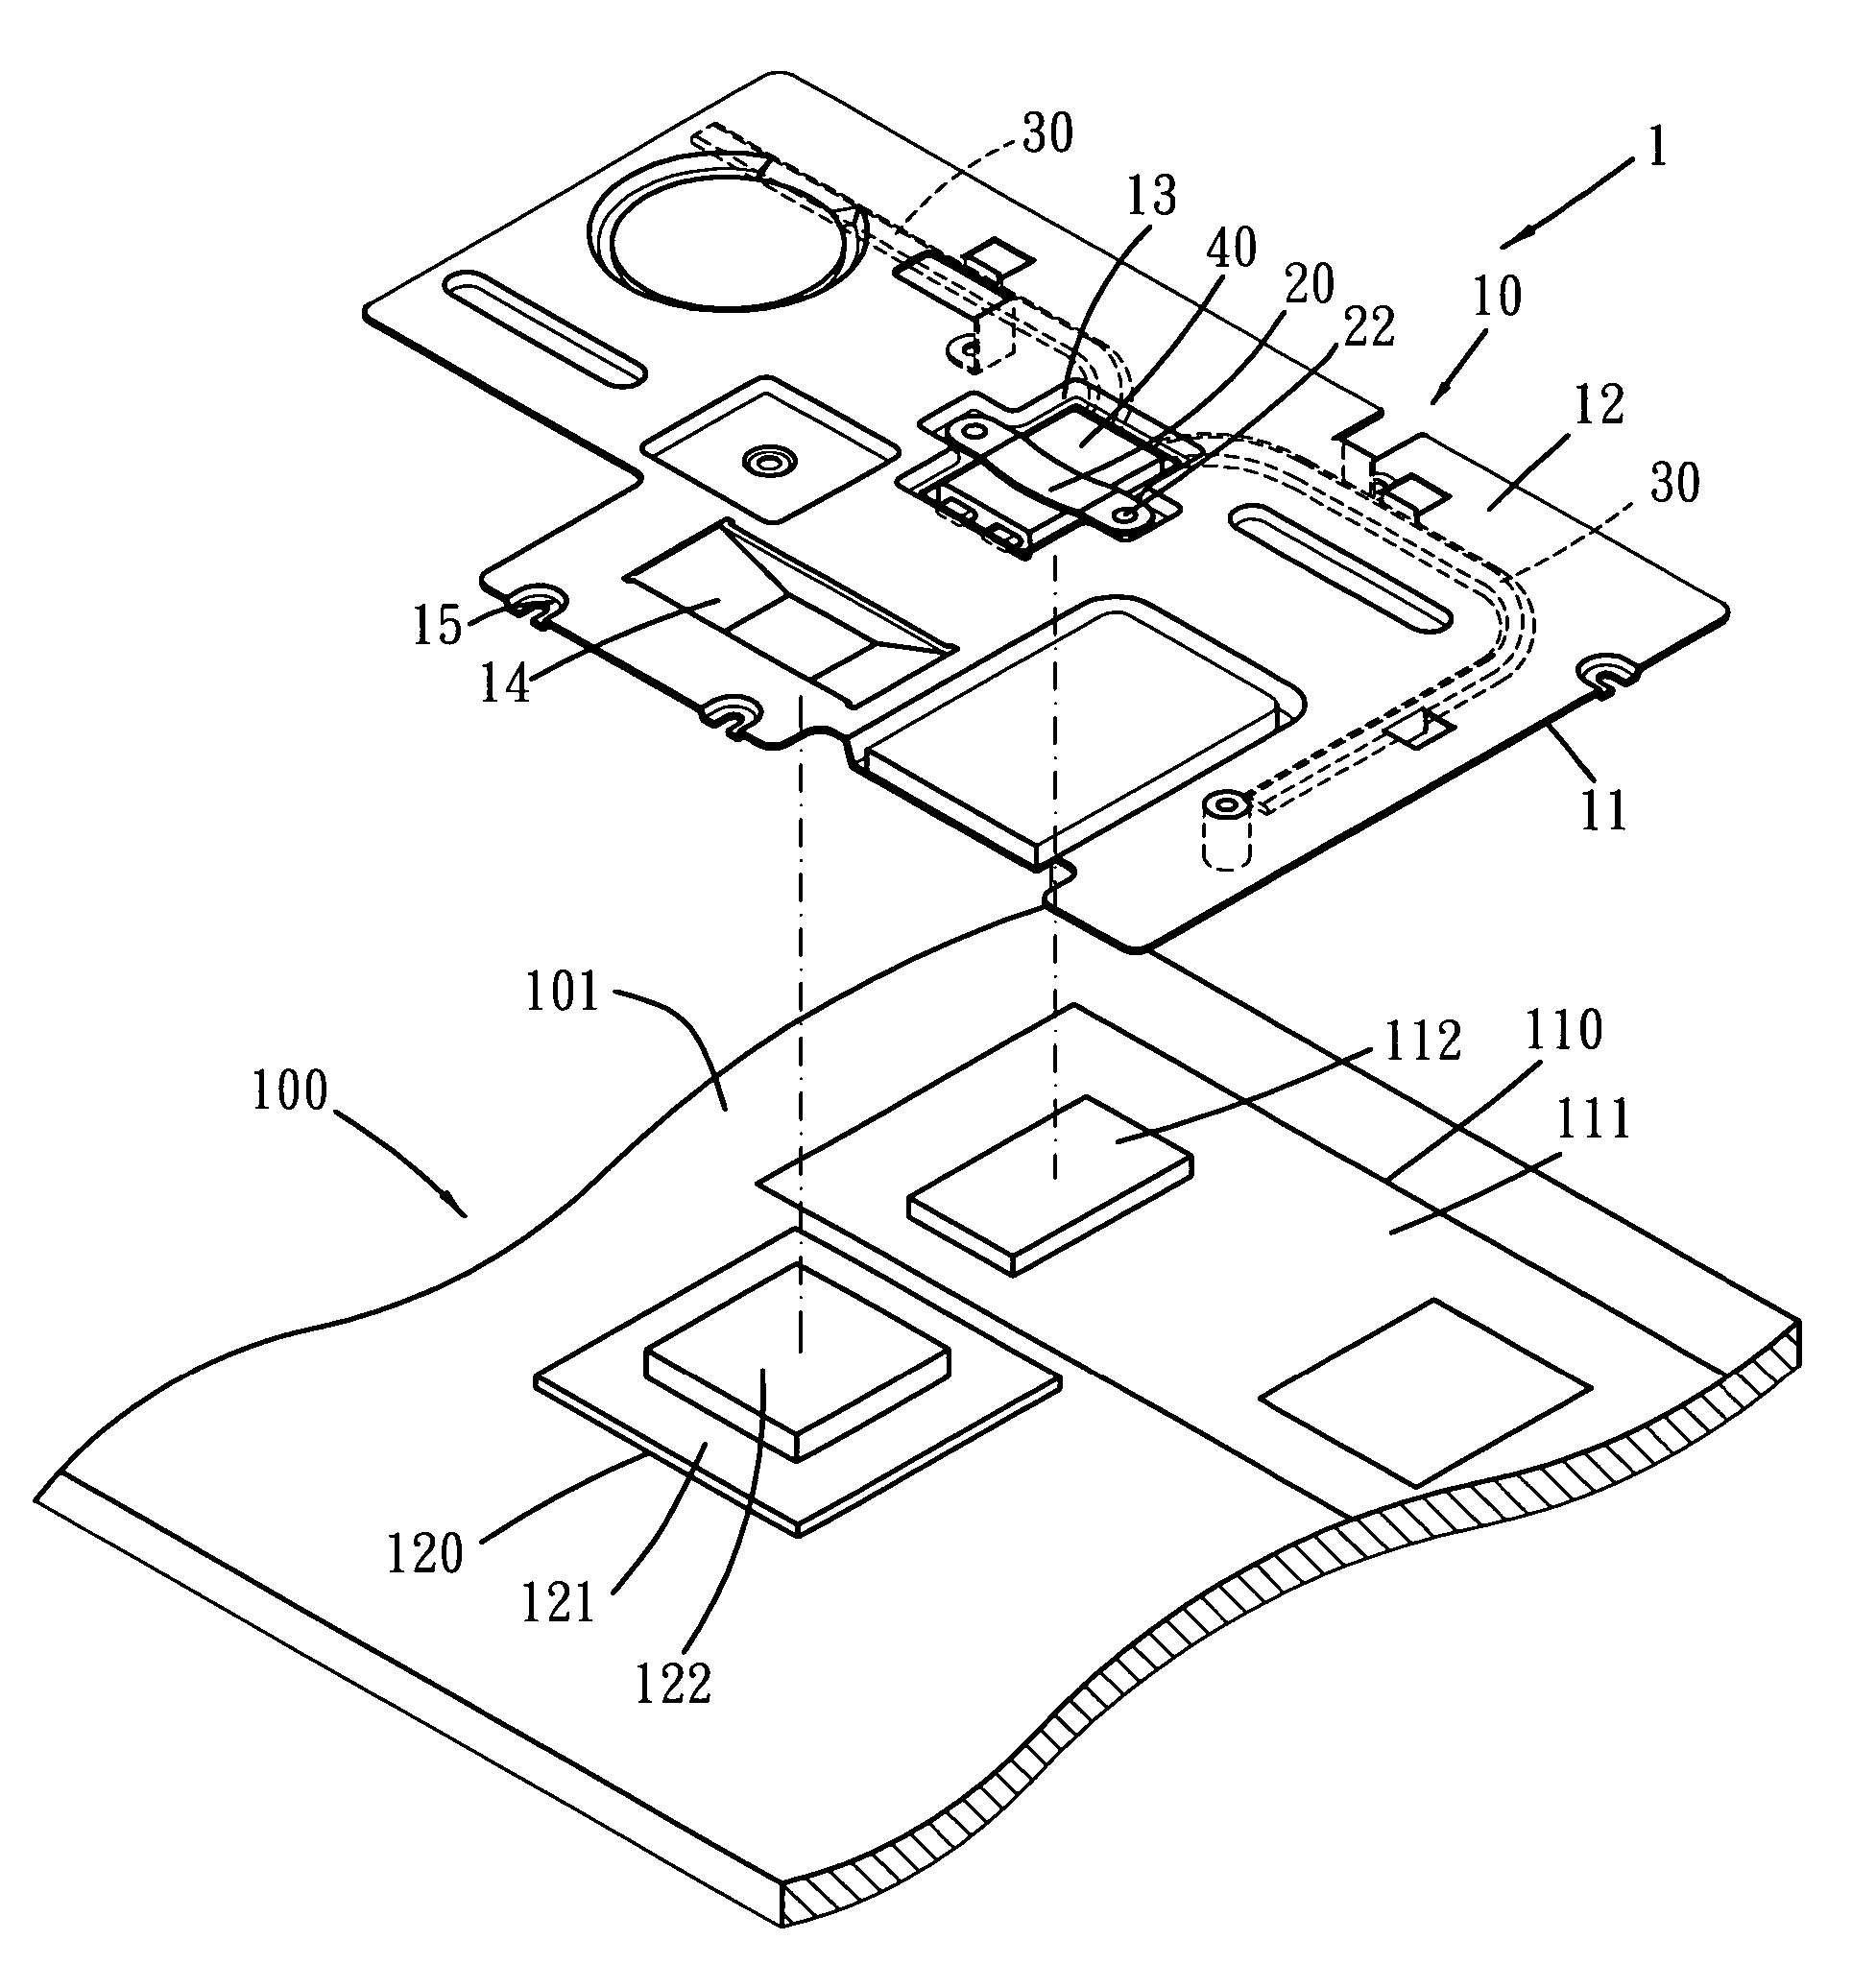 Heatsink device of video graphics array and chipset